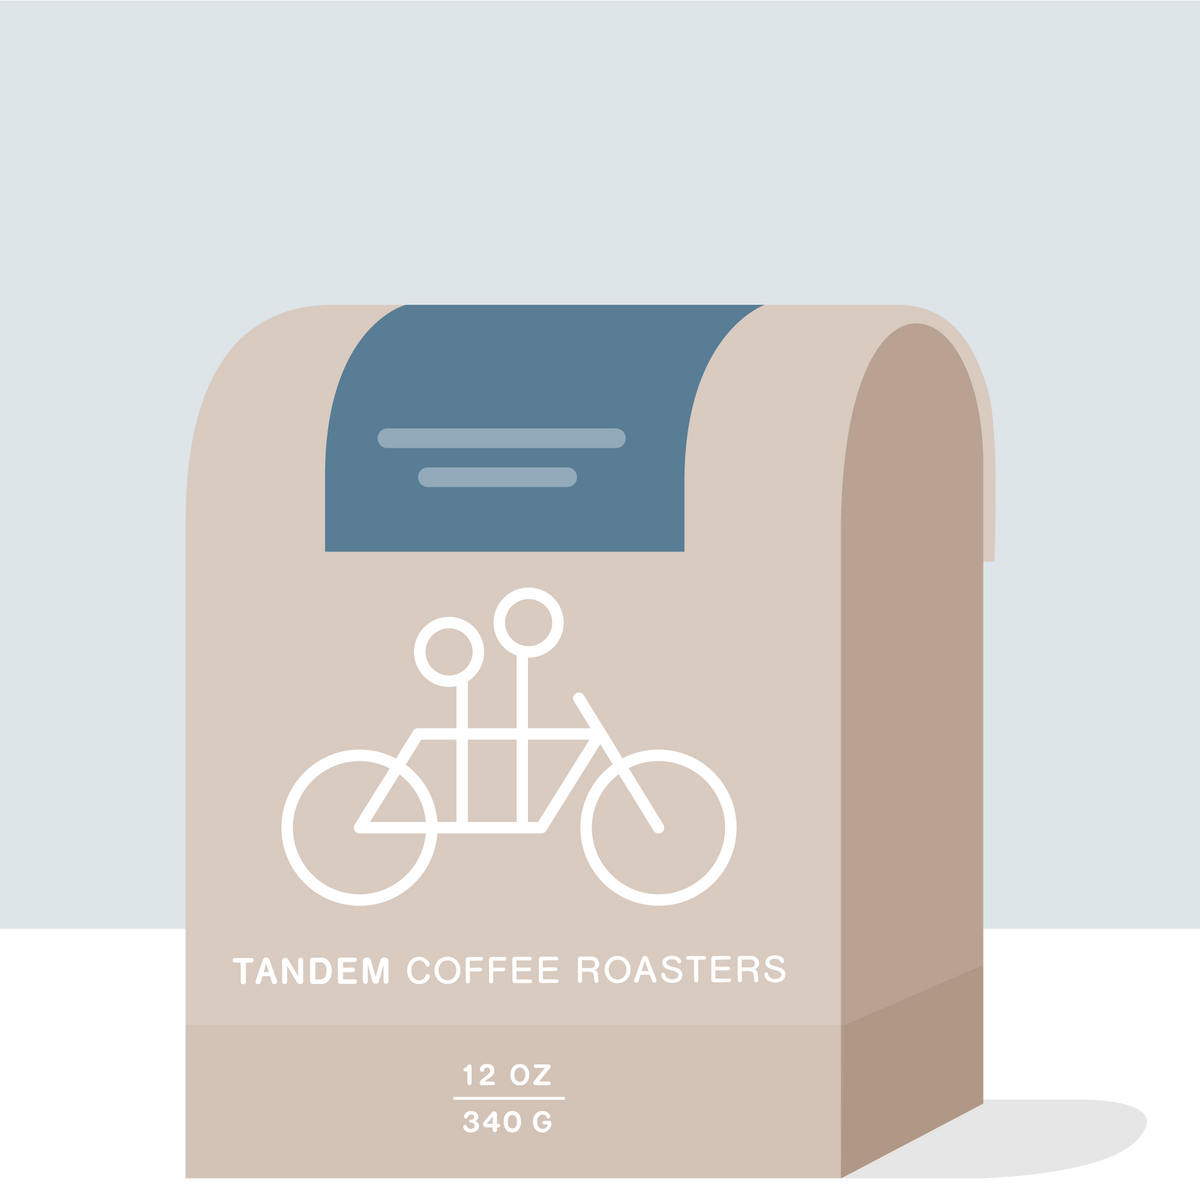 Illustration of a light brown paper coffee bag of La Muralla - Colombia with a bicycle logo labeled "Tandem Coffee Roasters" and a weight note of "12 oz, 340 g". The background is grey-blue.